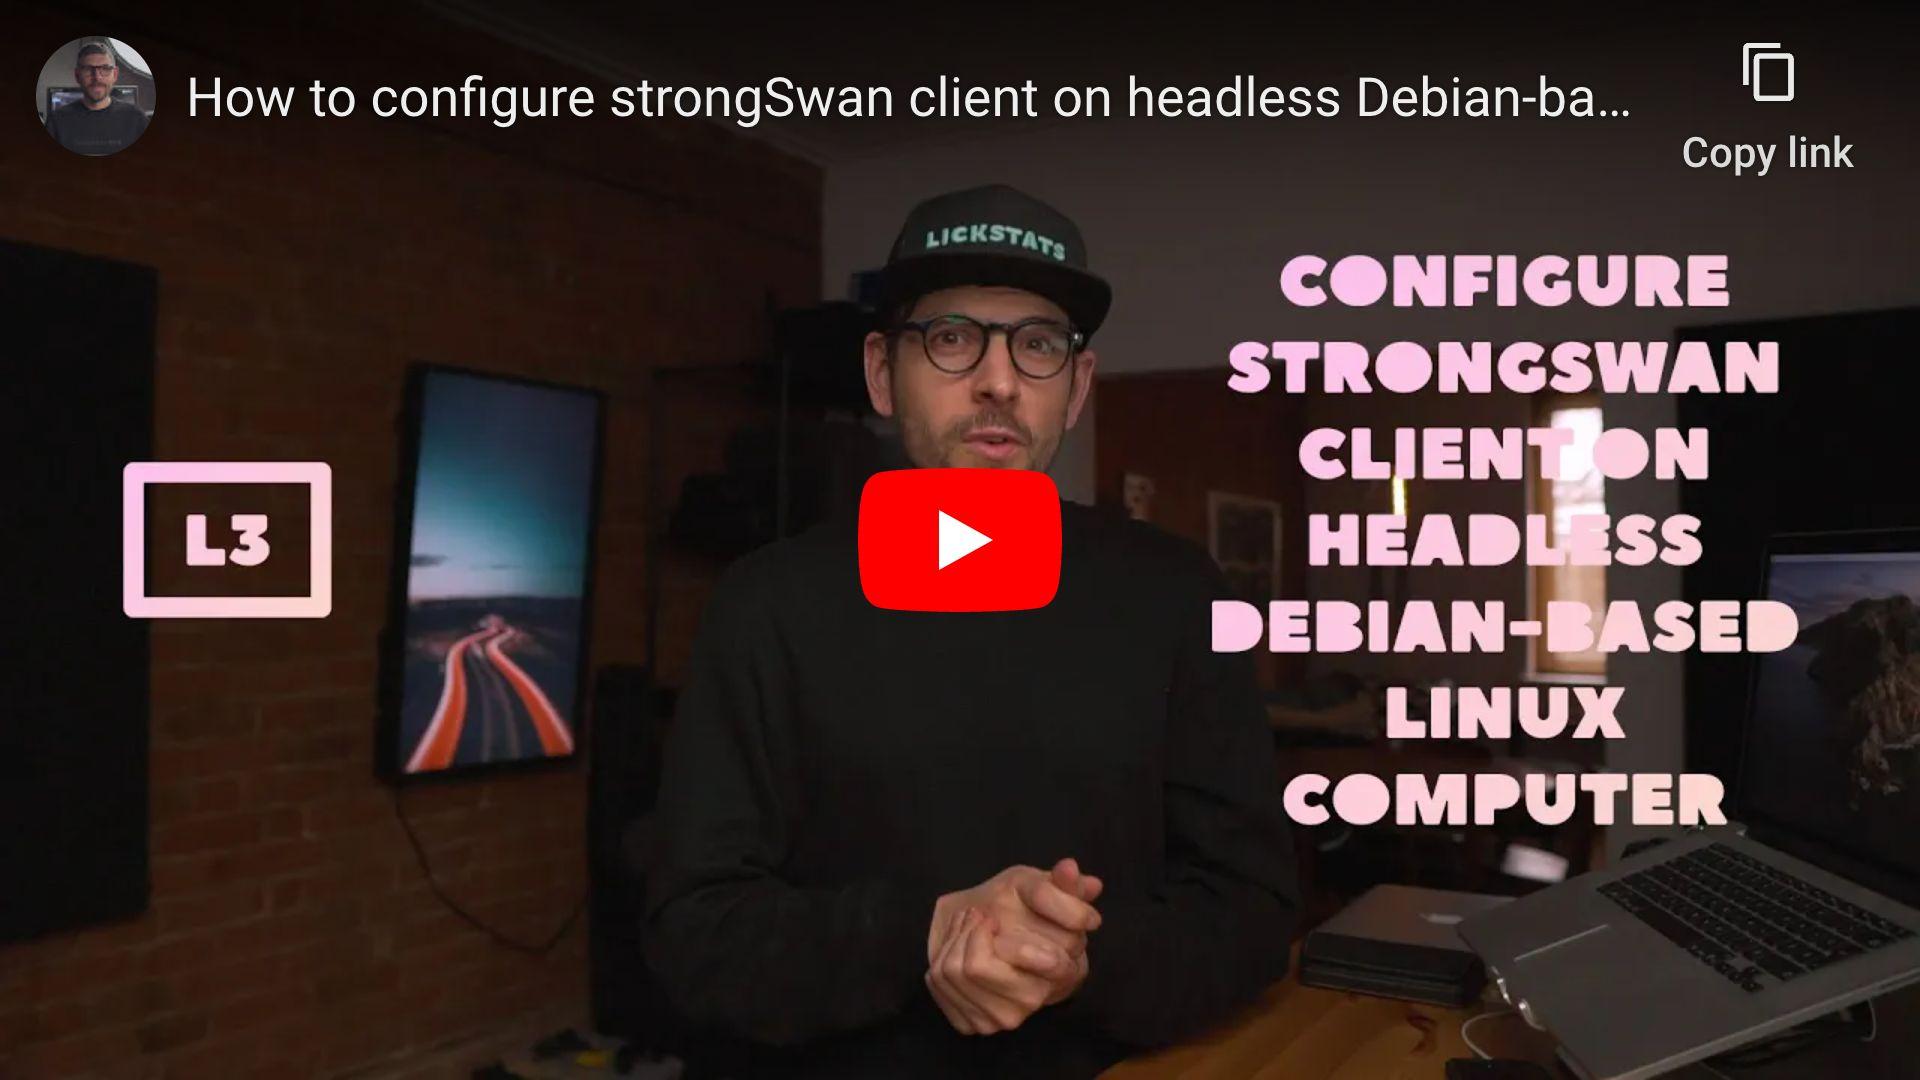 How to configure strongSwan client on headless Debian-based Linux computer